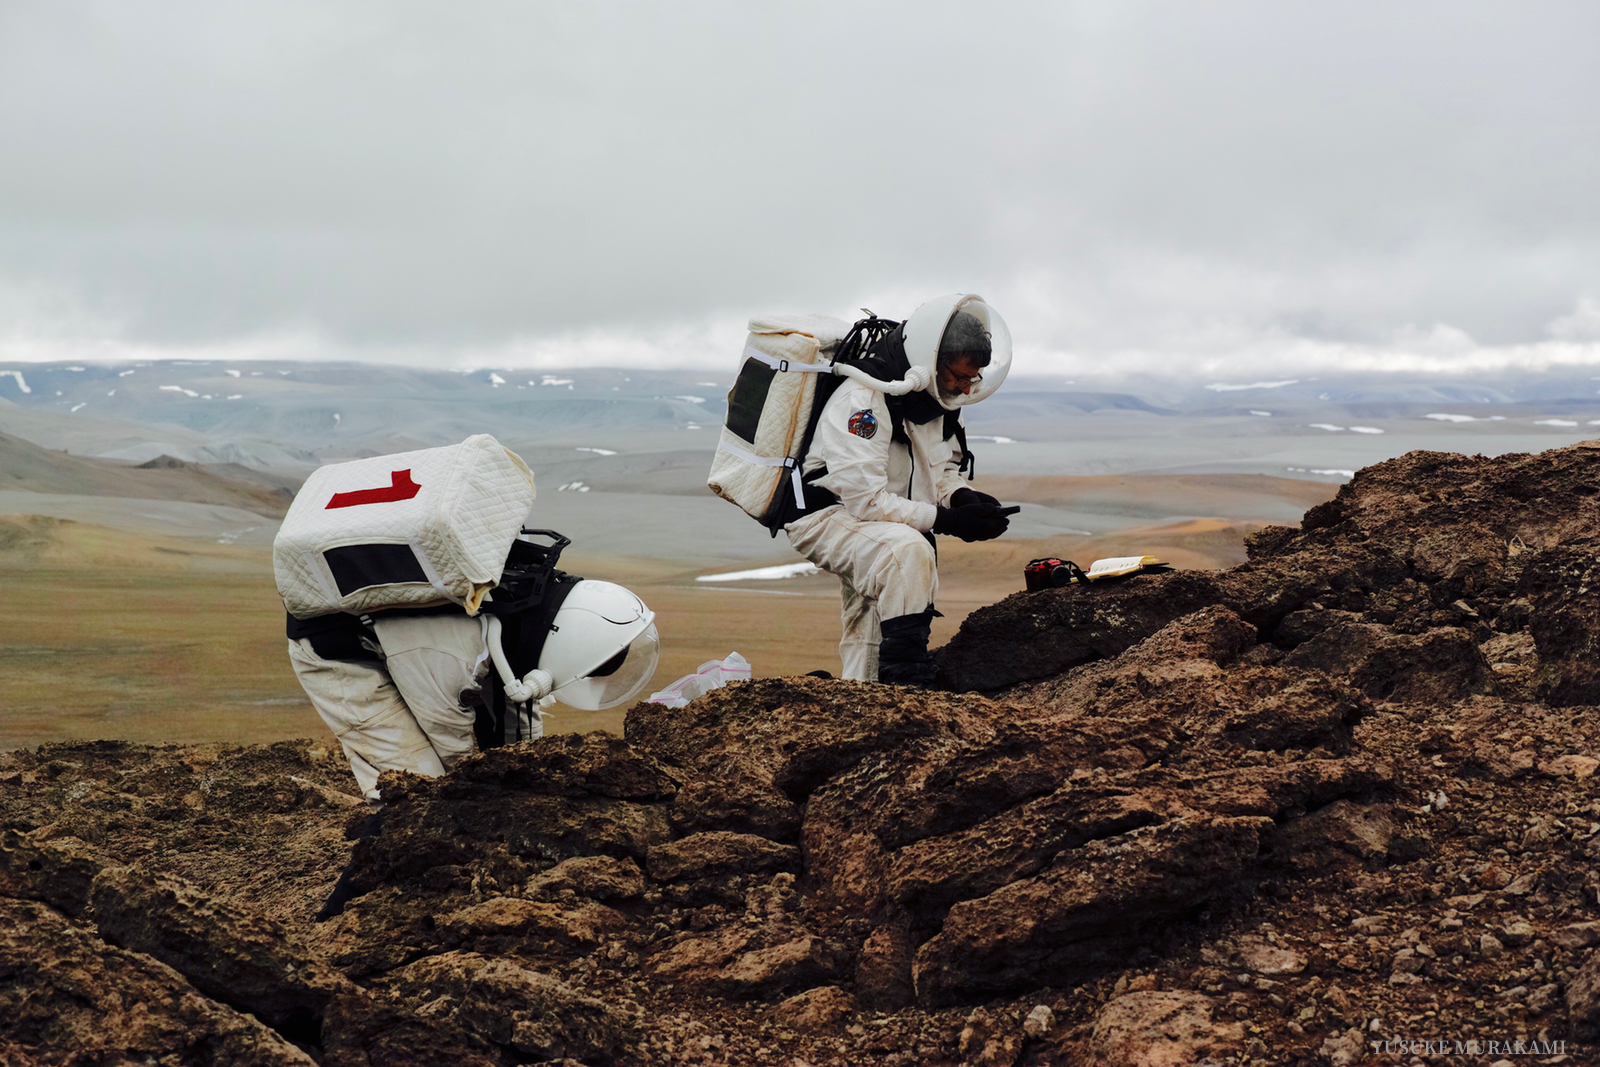 Mars simulation participants at Devon Island in the Canadian Arctic (Photo courtesy of the Mars Society)